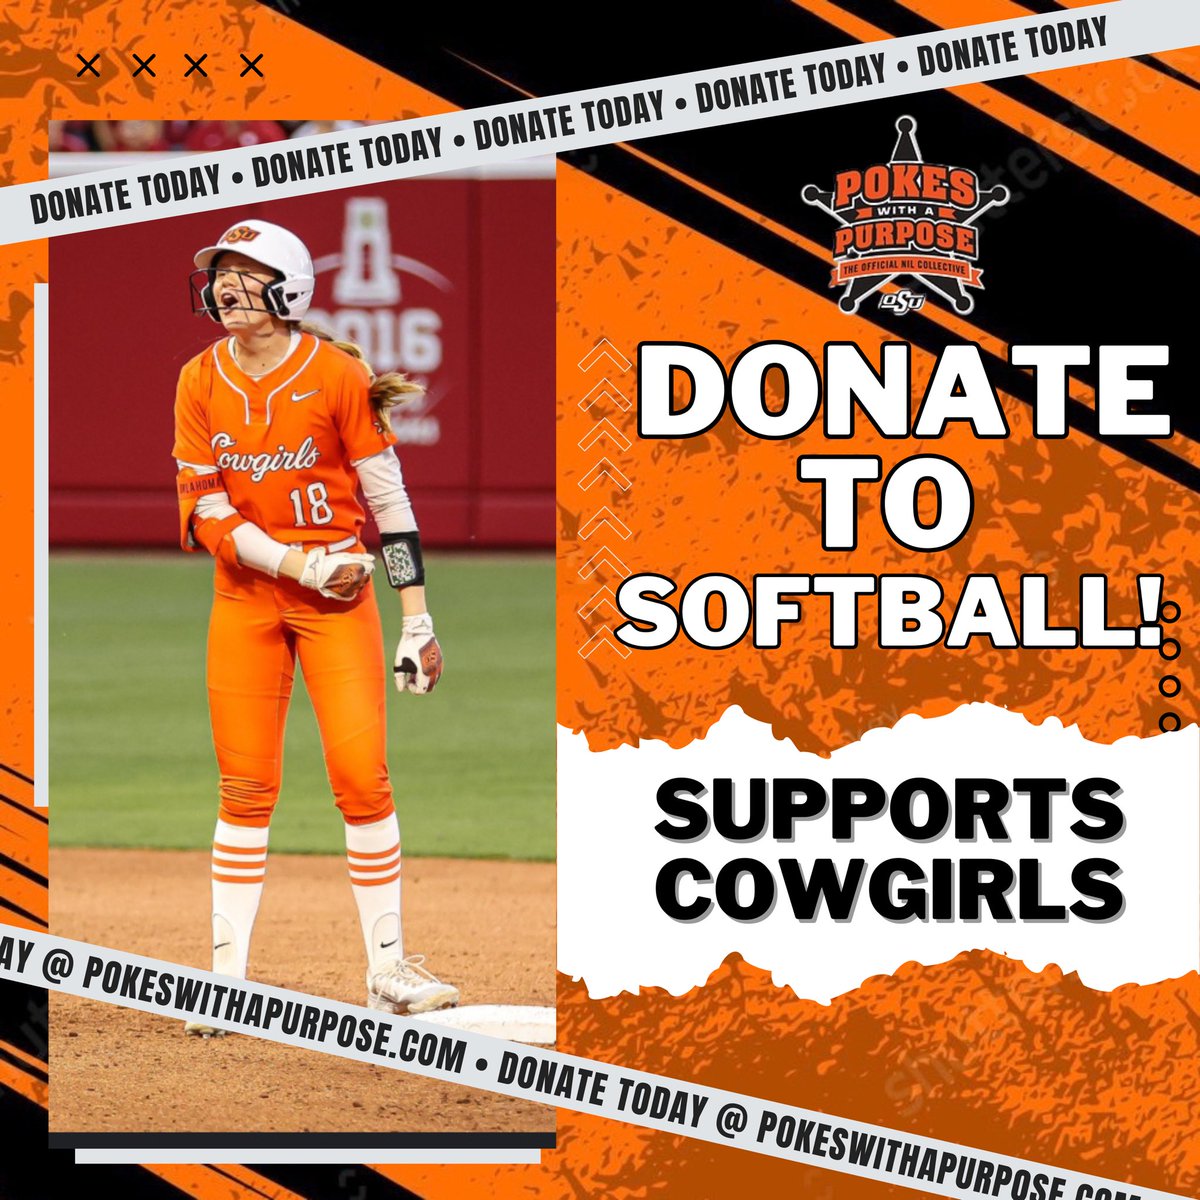 As girls compete for sweep tomorrow, we need your support! If you love watching and winning please support this great coach and team!🤠 PokesWithAPurpose.com